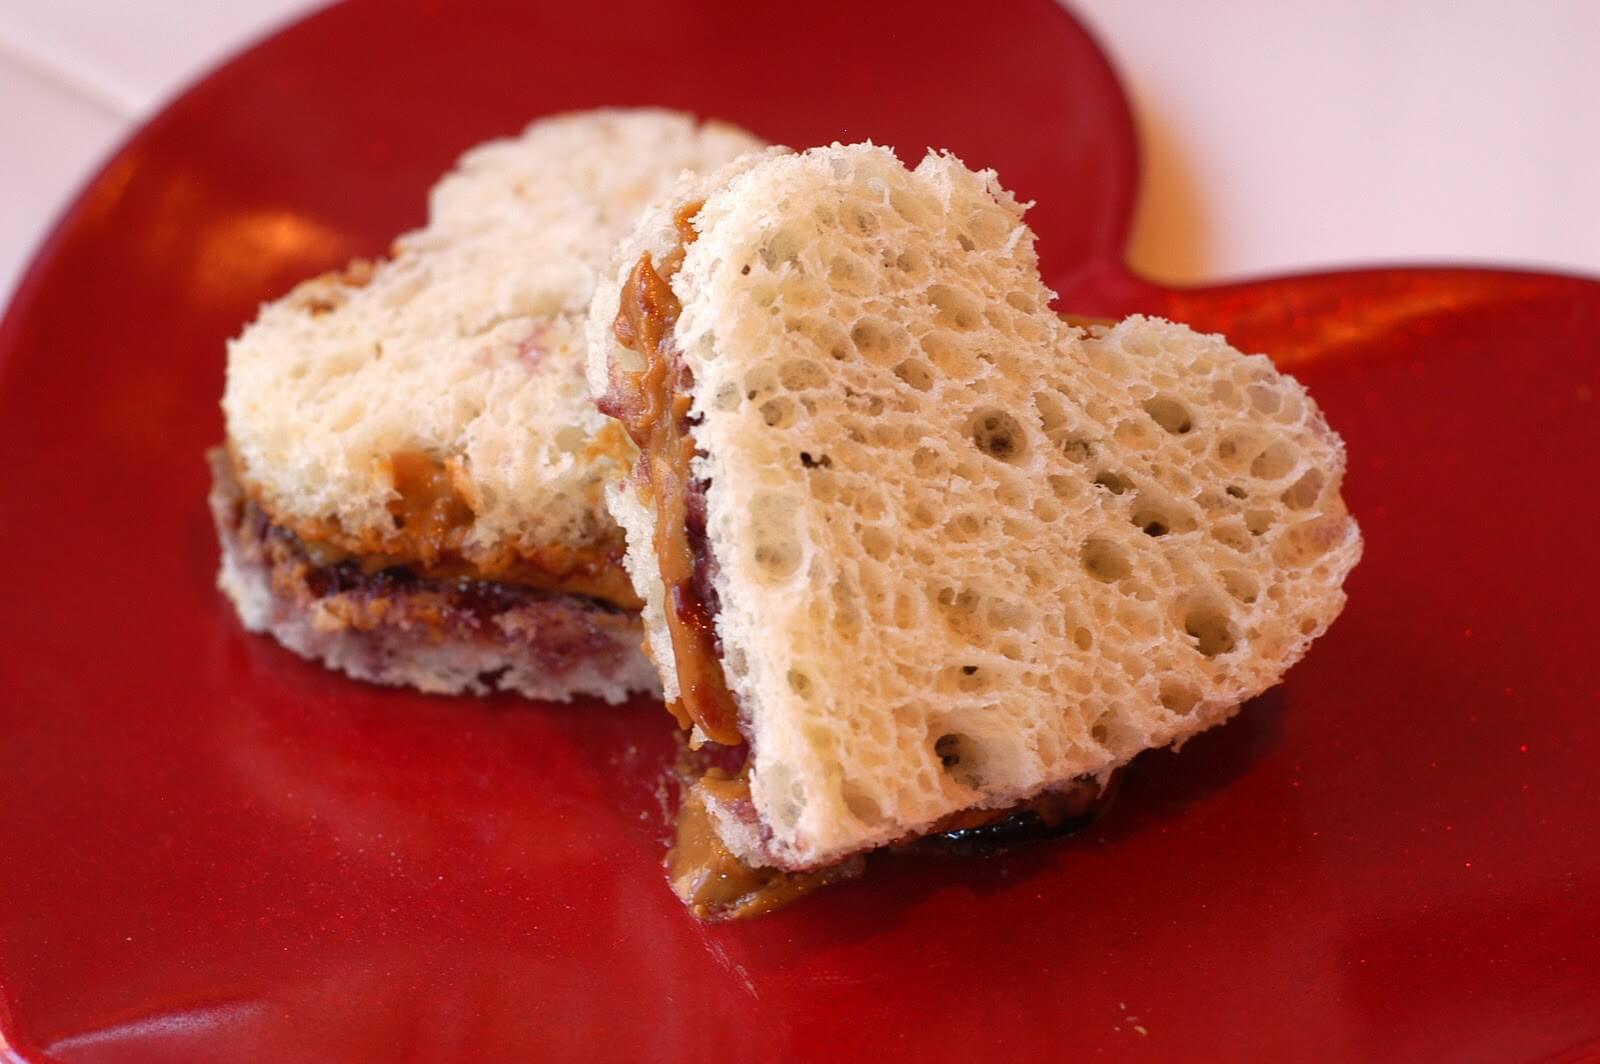 Cut peanut butter and jelly sandwiches into little shapes